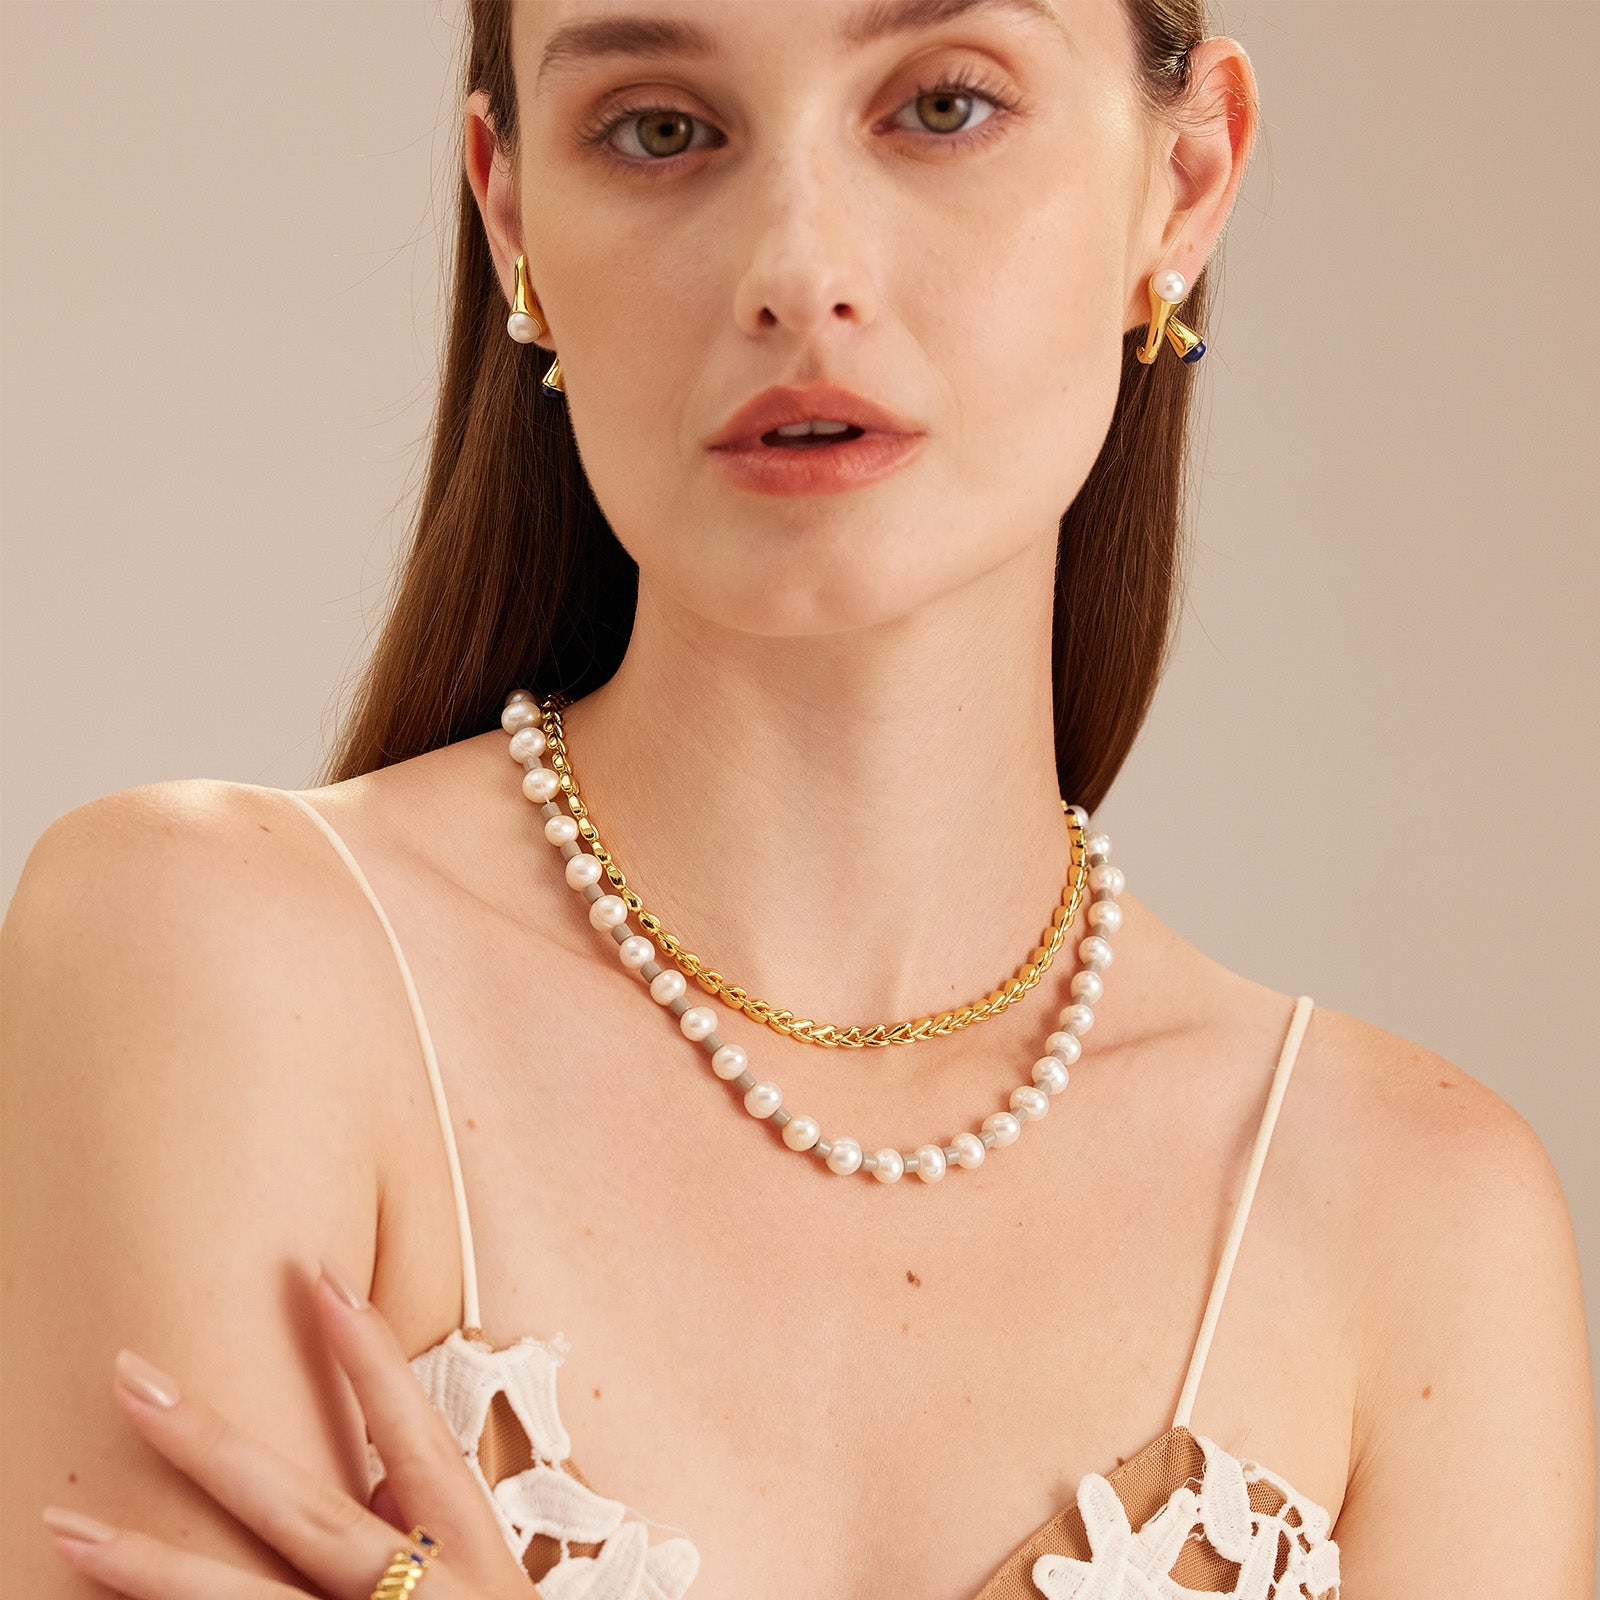 Crossover Hoop Earrings adorned with pearls, a sculptural and pearlescent creation that adds sophistication and charm to your ensemble.